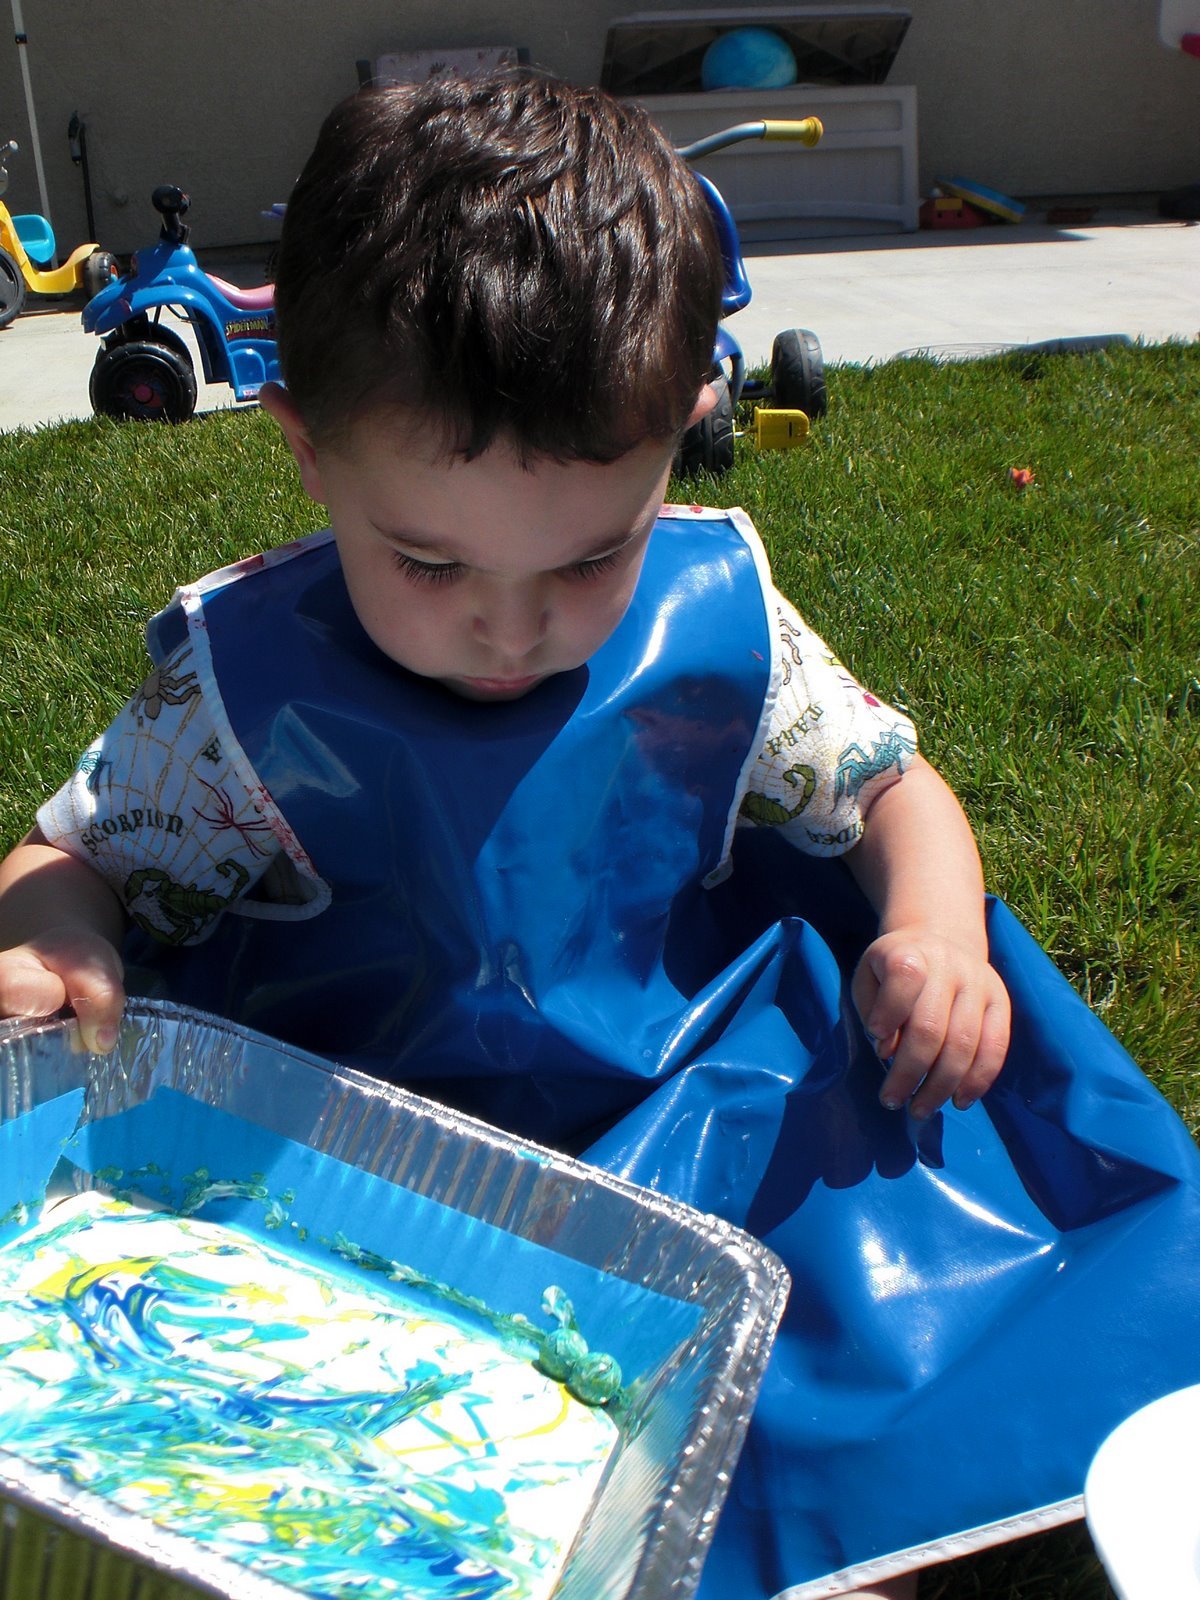 small child wearing apron painting with marbles in tray